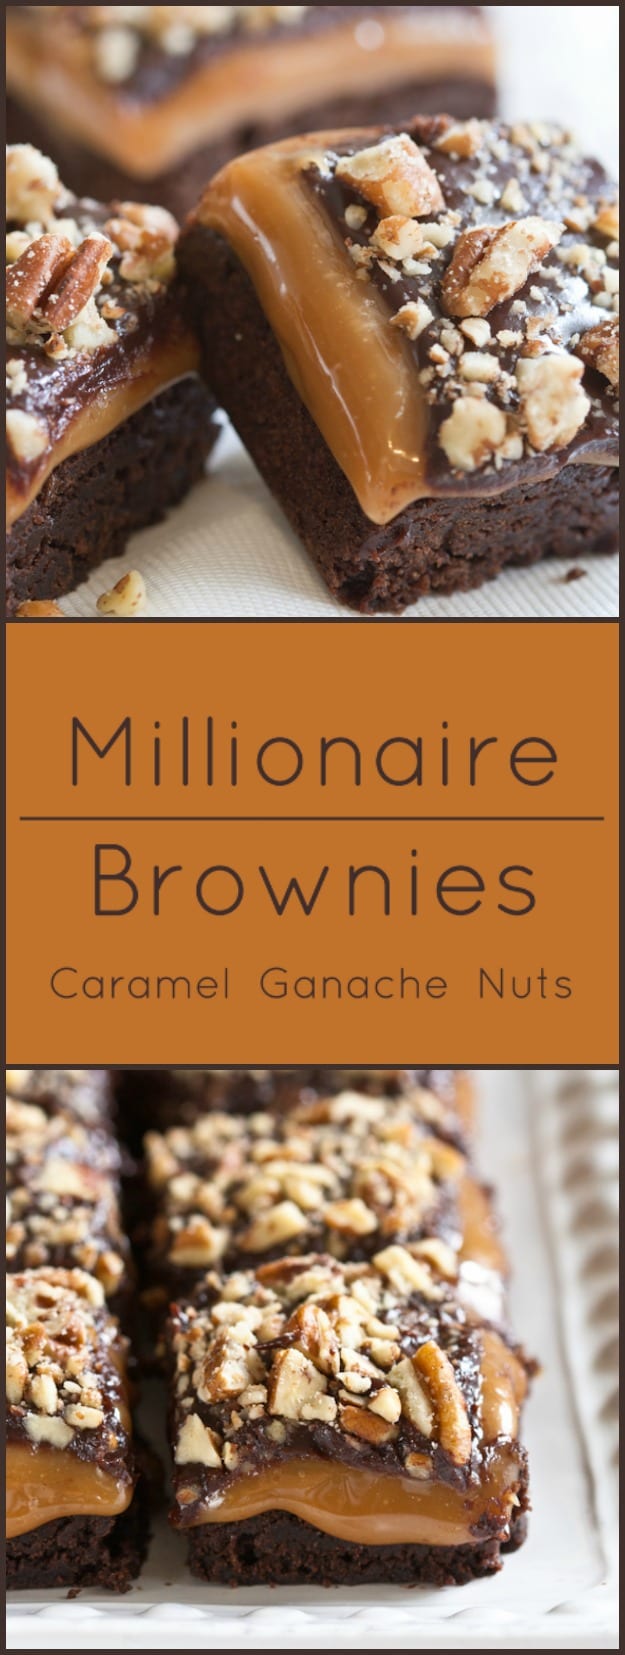 Millionaire Brownies. Moist brownies layered with caramel, ganache and nuts. 